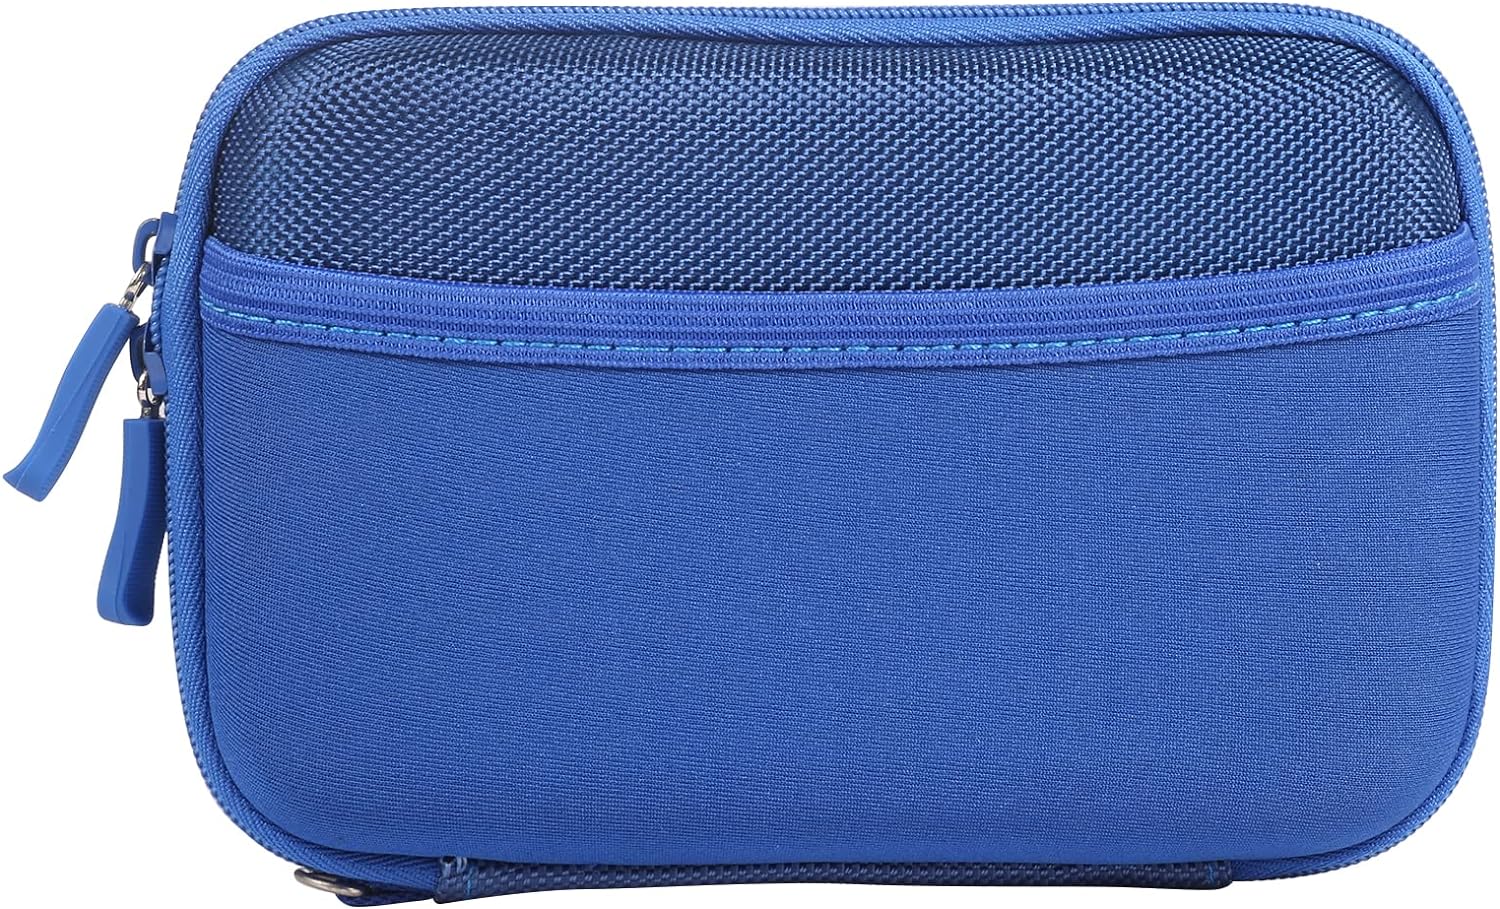 Hard Shell Diabetic Supplies Travel Case Organizer Bag for Blood Glucose Meter, Blood Sugar Test Strips, Lancets, Syringes, Pens, Needles, Alcohol Wipes, Diabetes Testing Kit Case (Small, Blue)